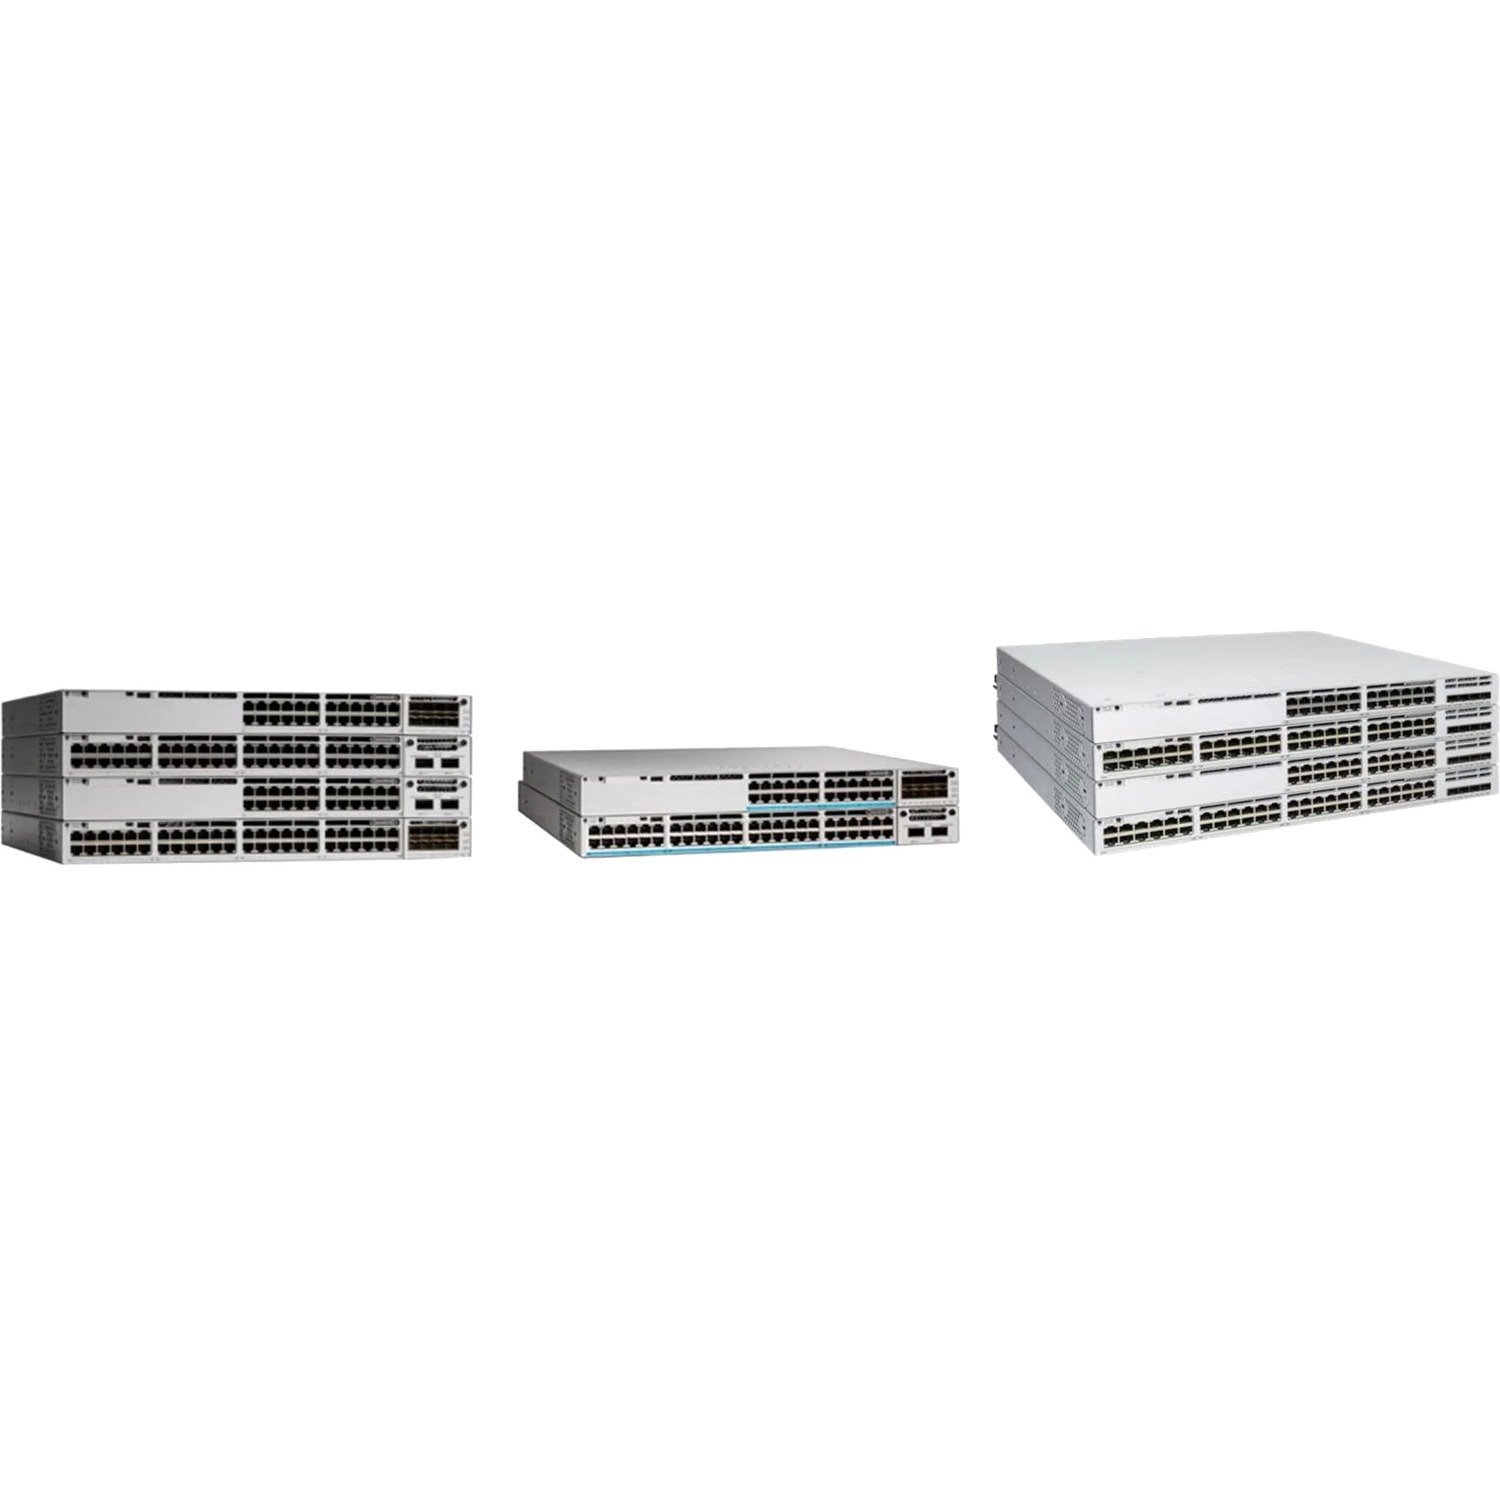 Cisco Catalyst 9300 C9300-24UXB 24 Ports Manageable Ethernet Switch